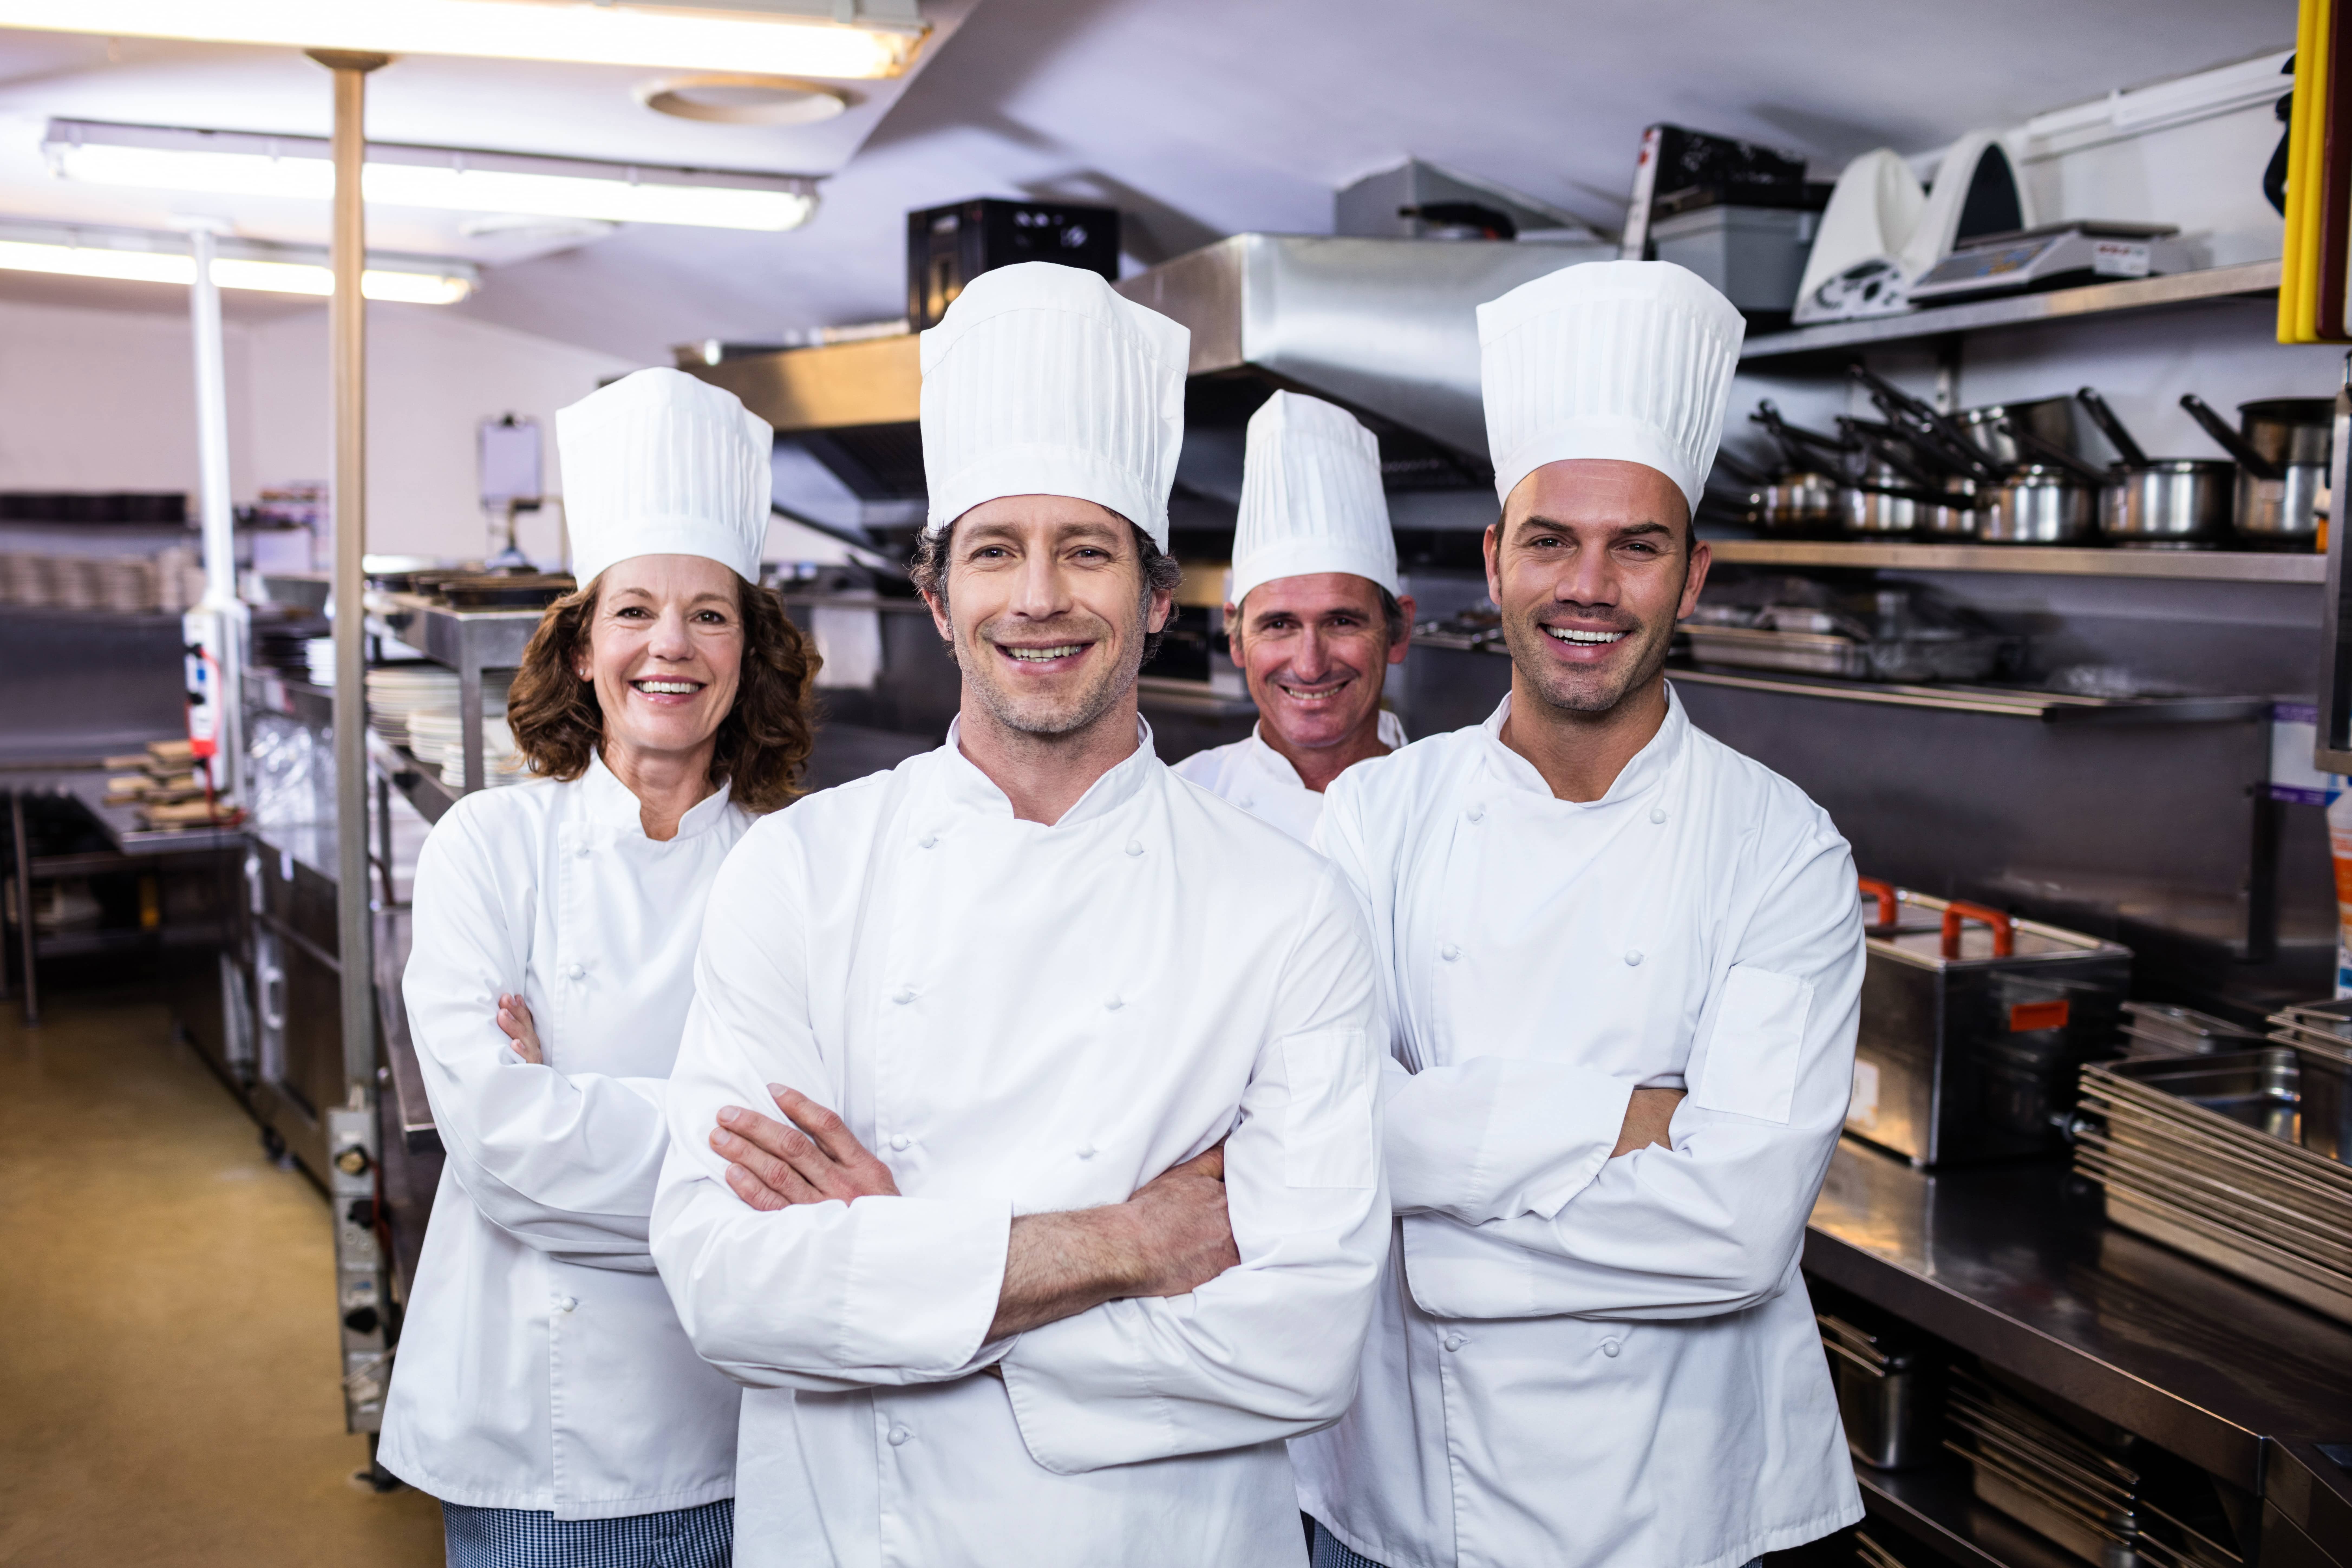 Group of happy chefs smiling at the camera 